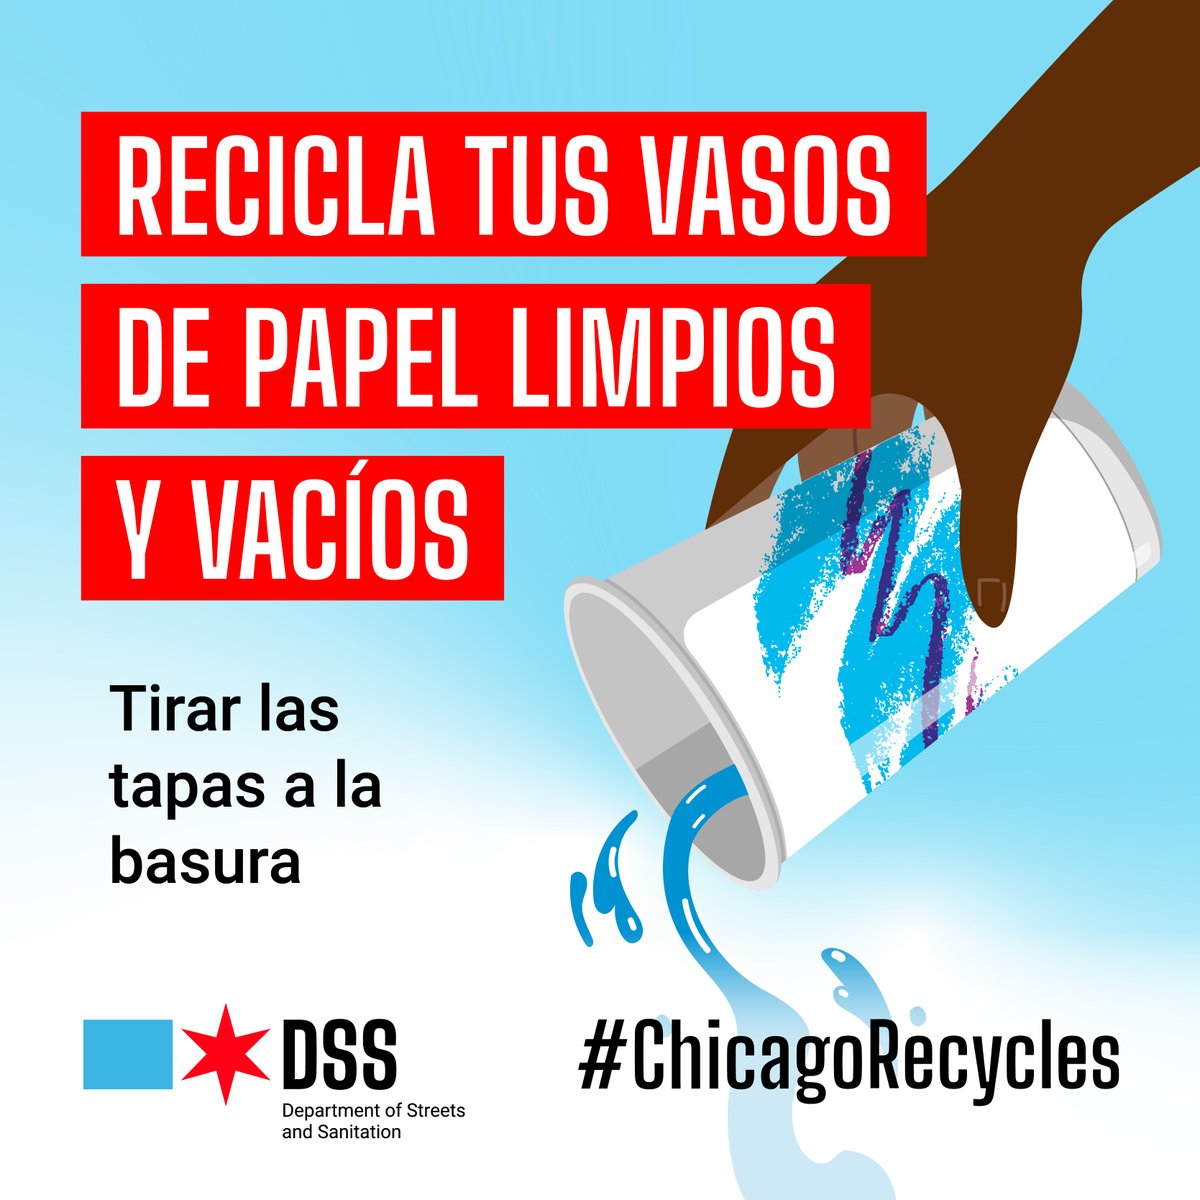 When you grab that cup of coffee or a drink with takeout, please know those paper cups are now #recyclable in #Chicago! And recycling helps ensure reuse of materials, which assists with the fight against #climatechange. More: chicagorecycles.org #chicagorecycles